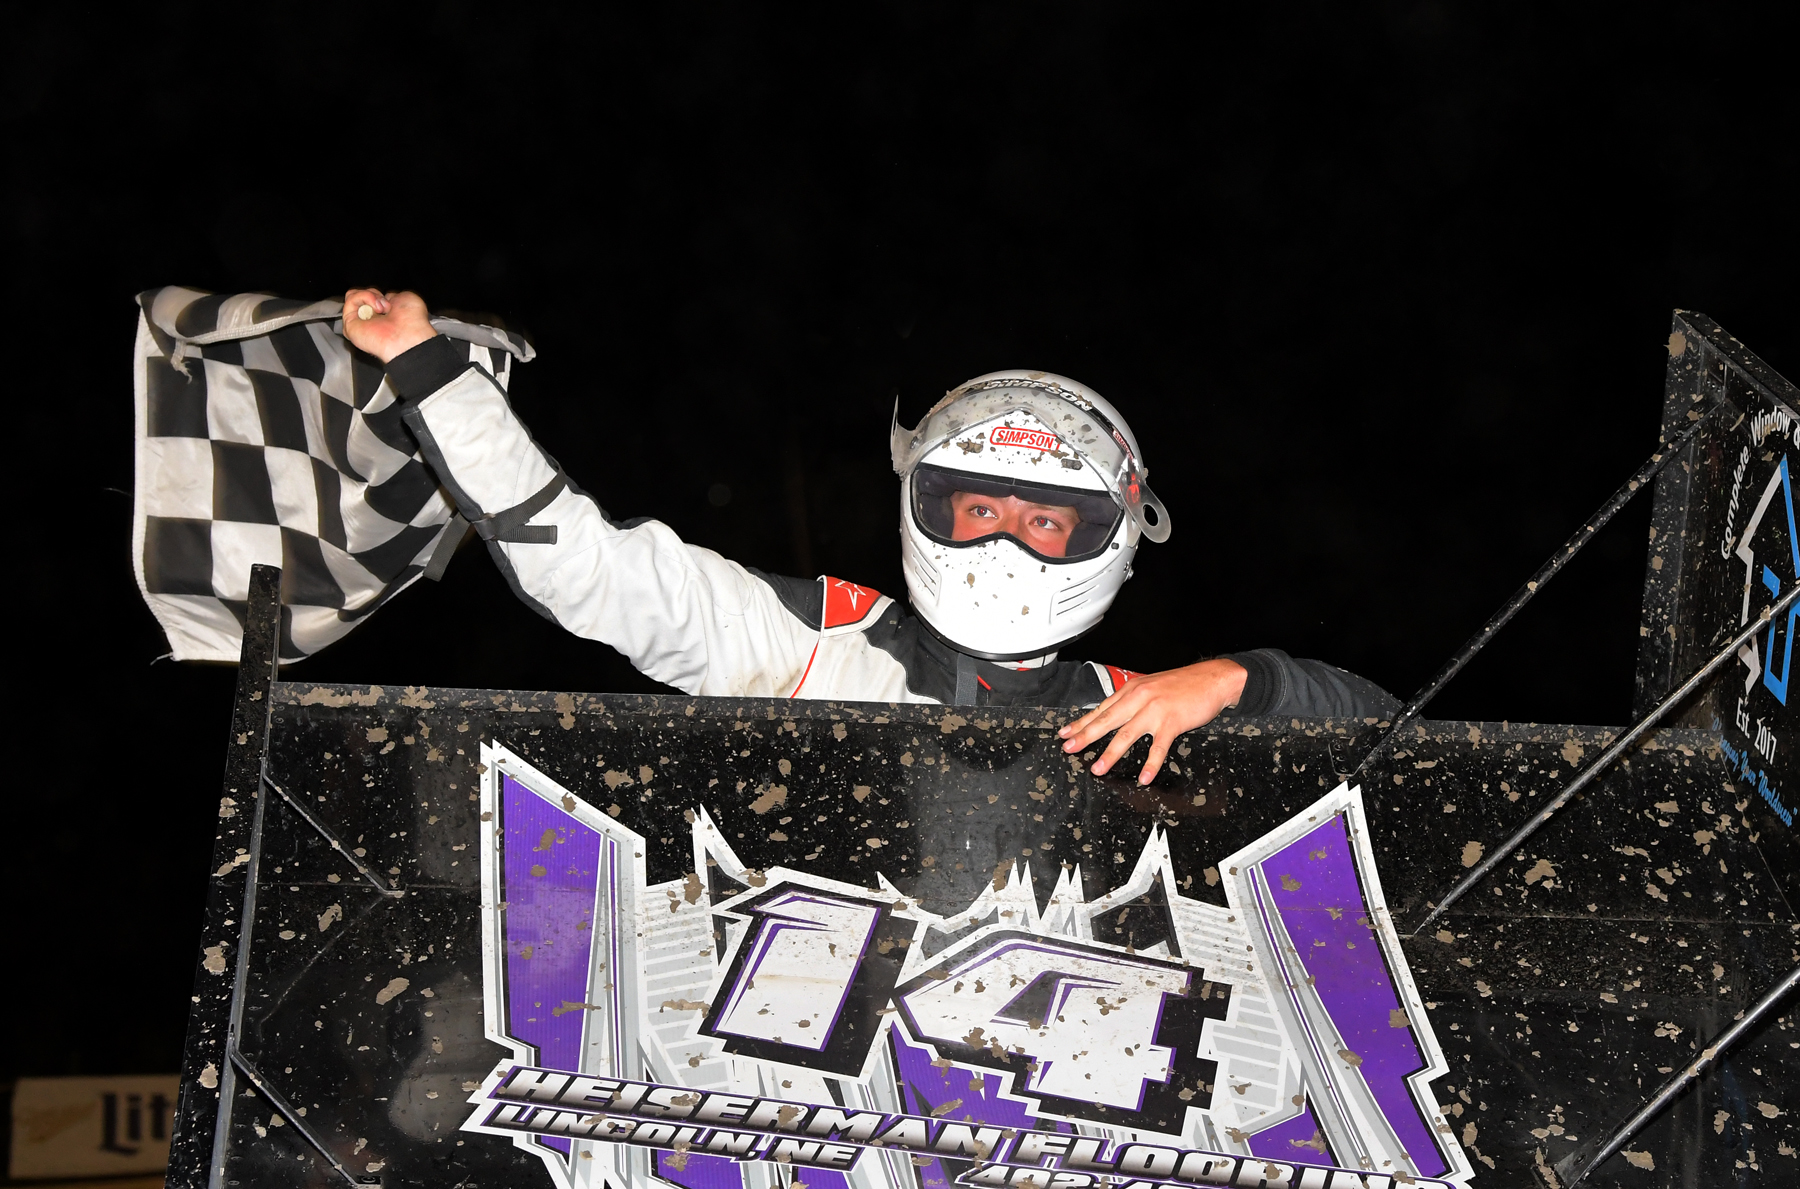 Joey Danley conquers the Highbanks of Eagle Raceway in Eagle, NE